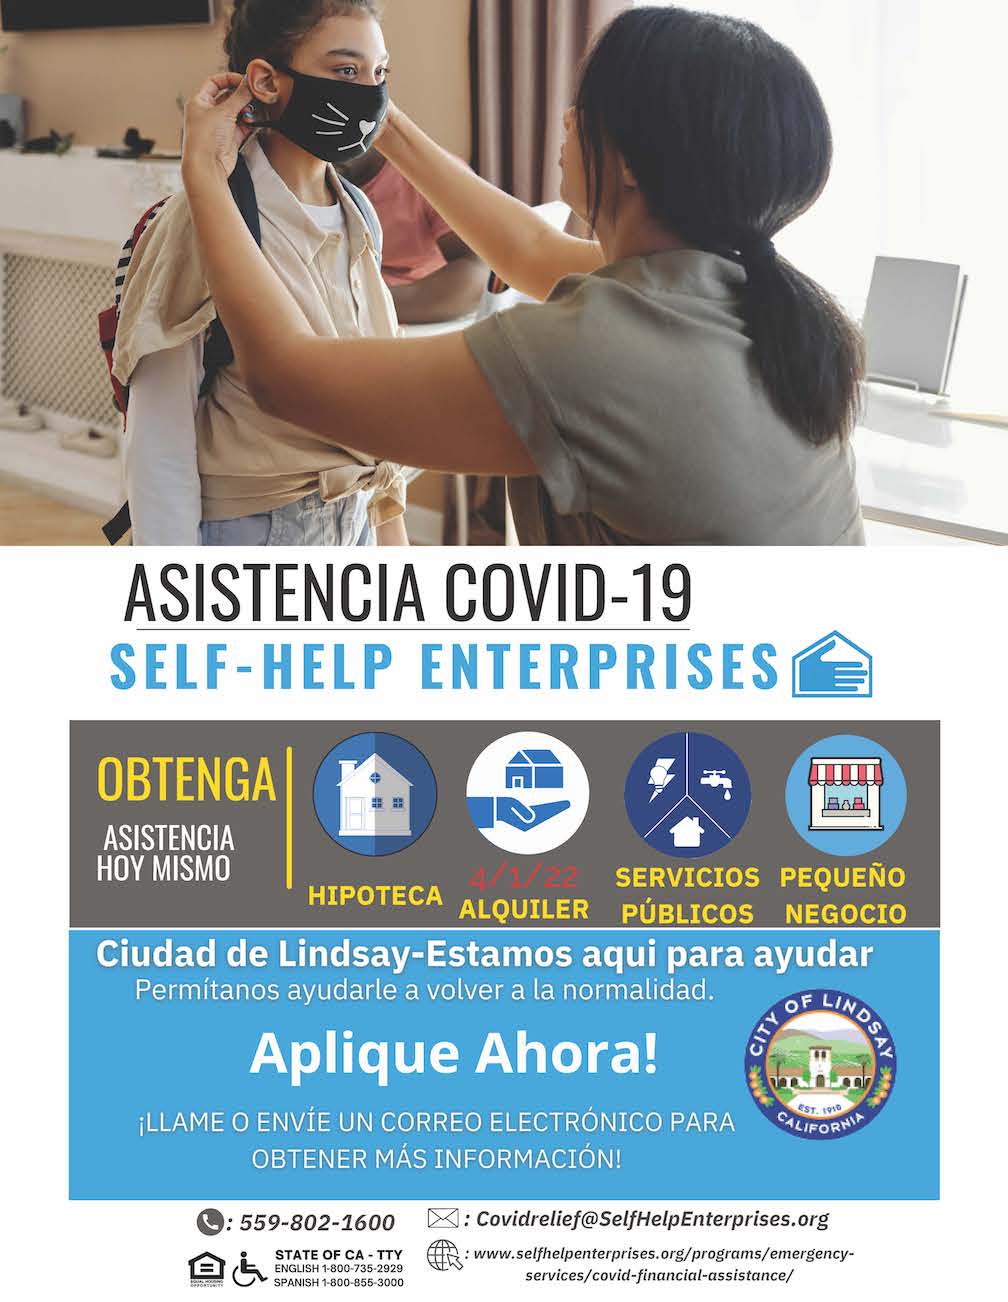 Covid Assistance in Spanish